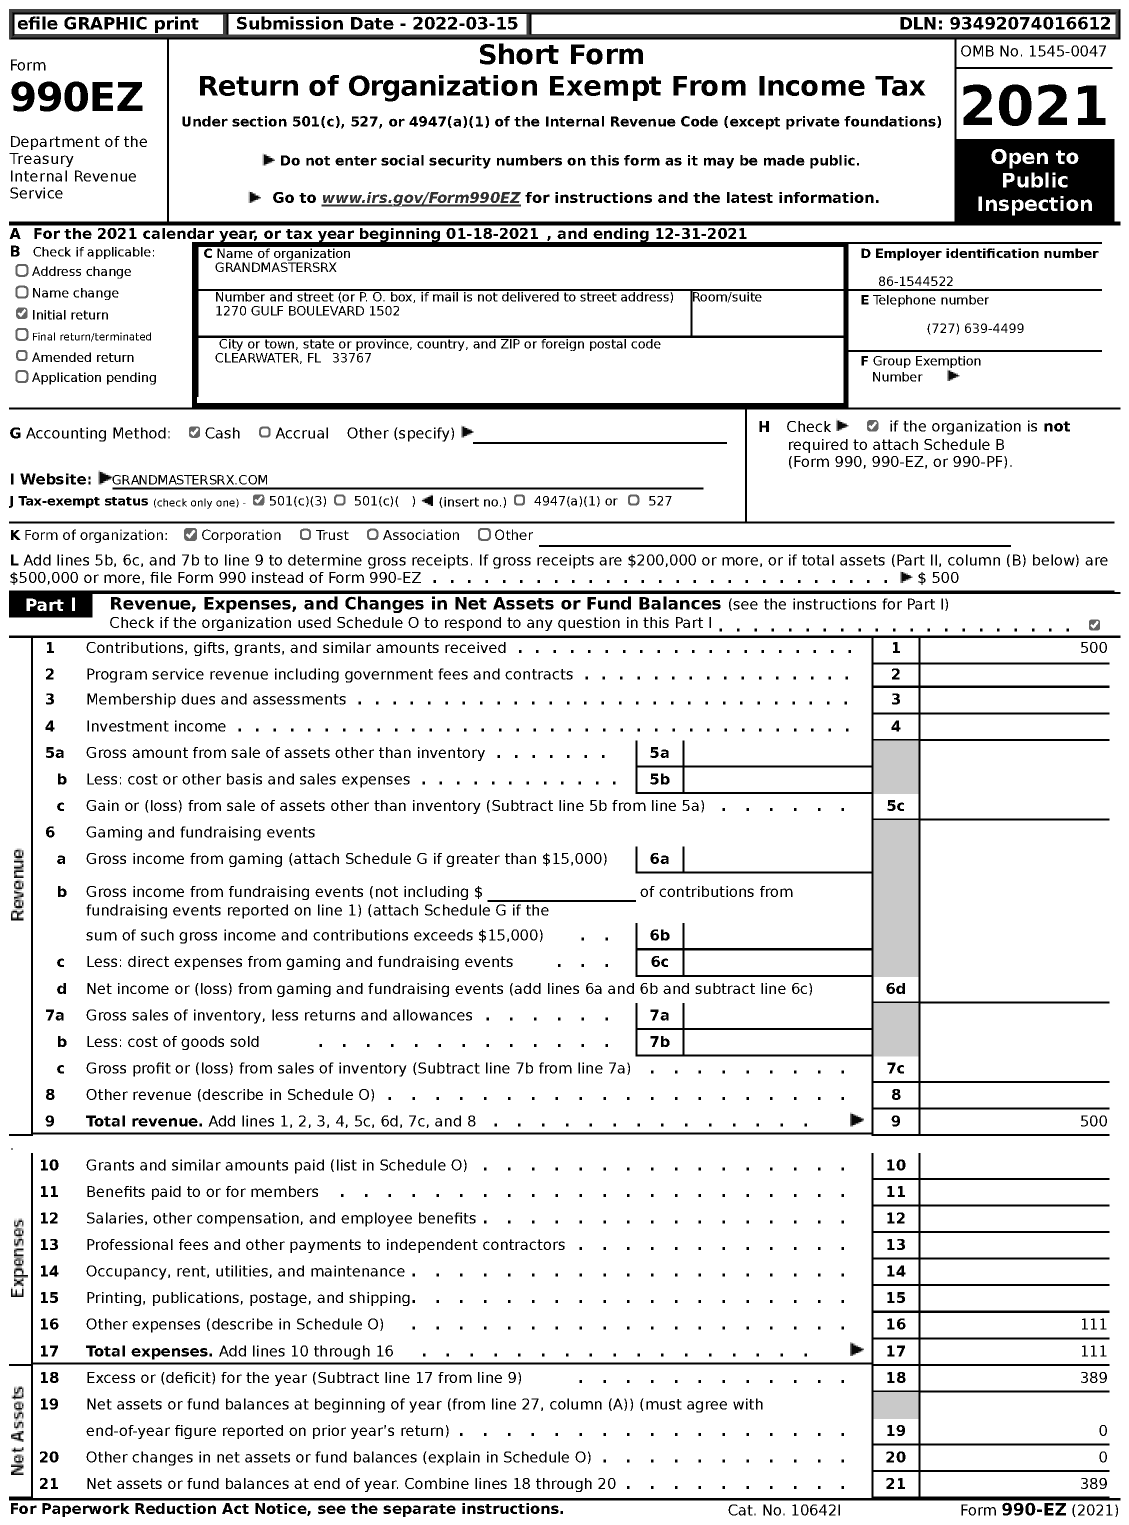 Image of first page of 2021 Form 990EZ for Grandmastersrx